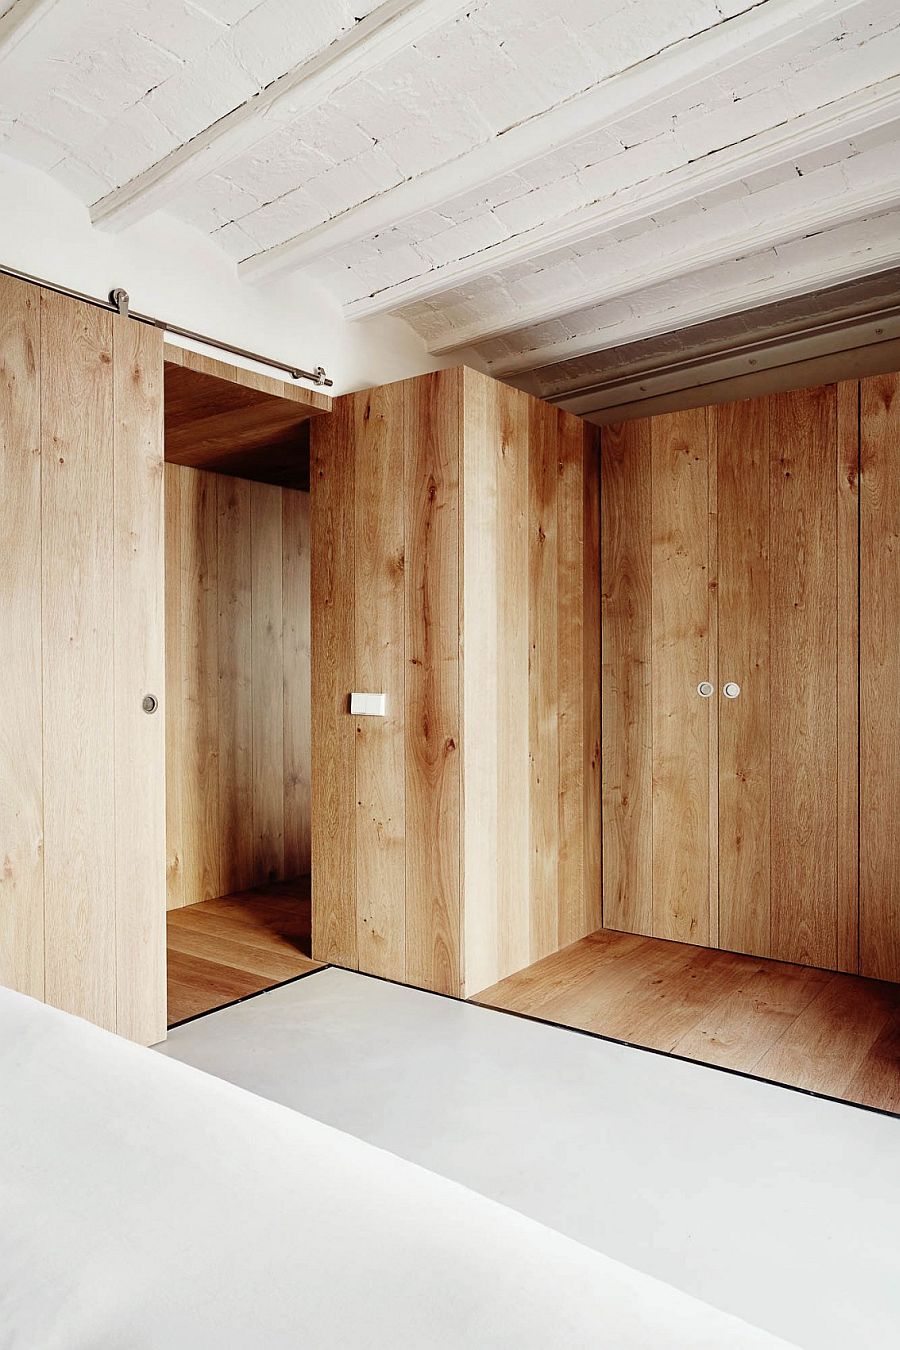 Wooden walls create smart partitions and private zones inside the tiny tourist apartment